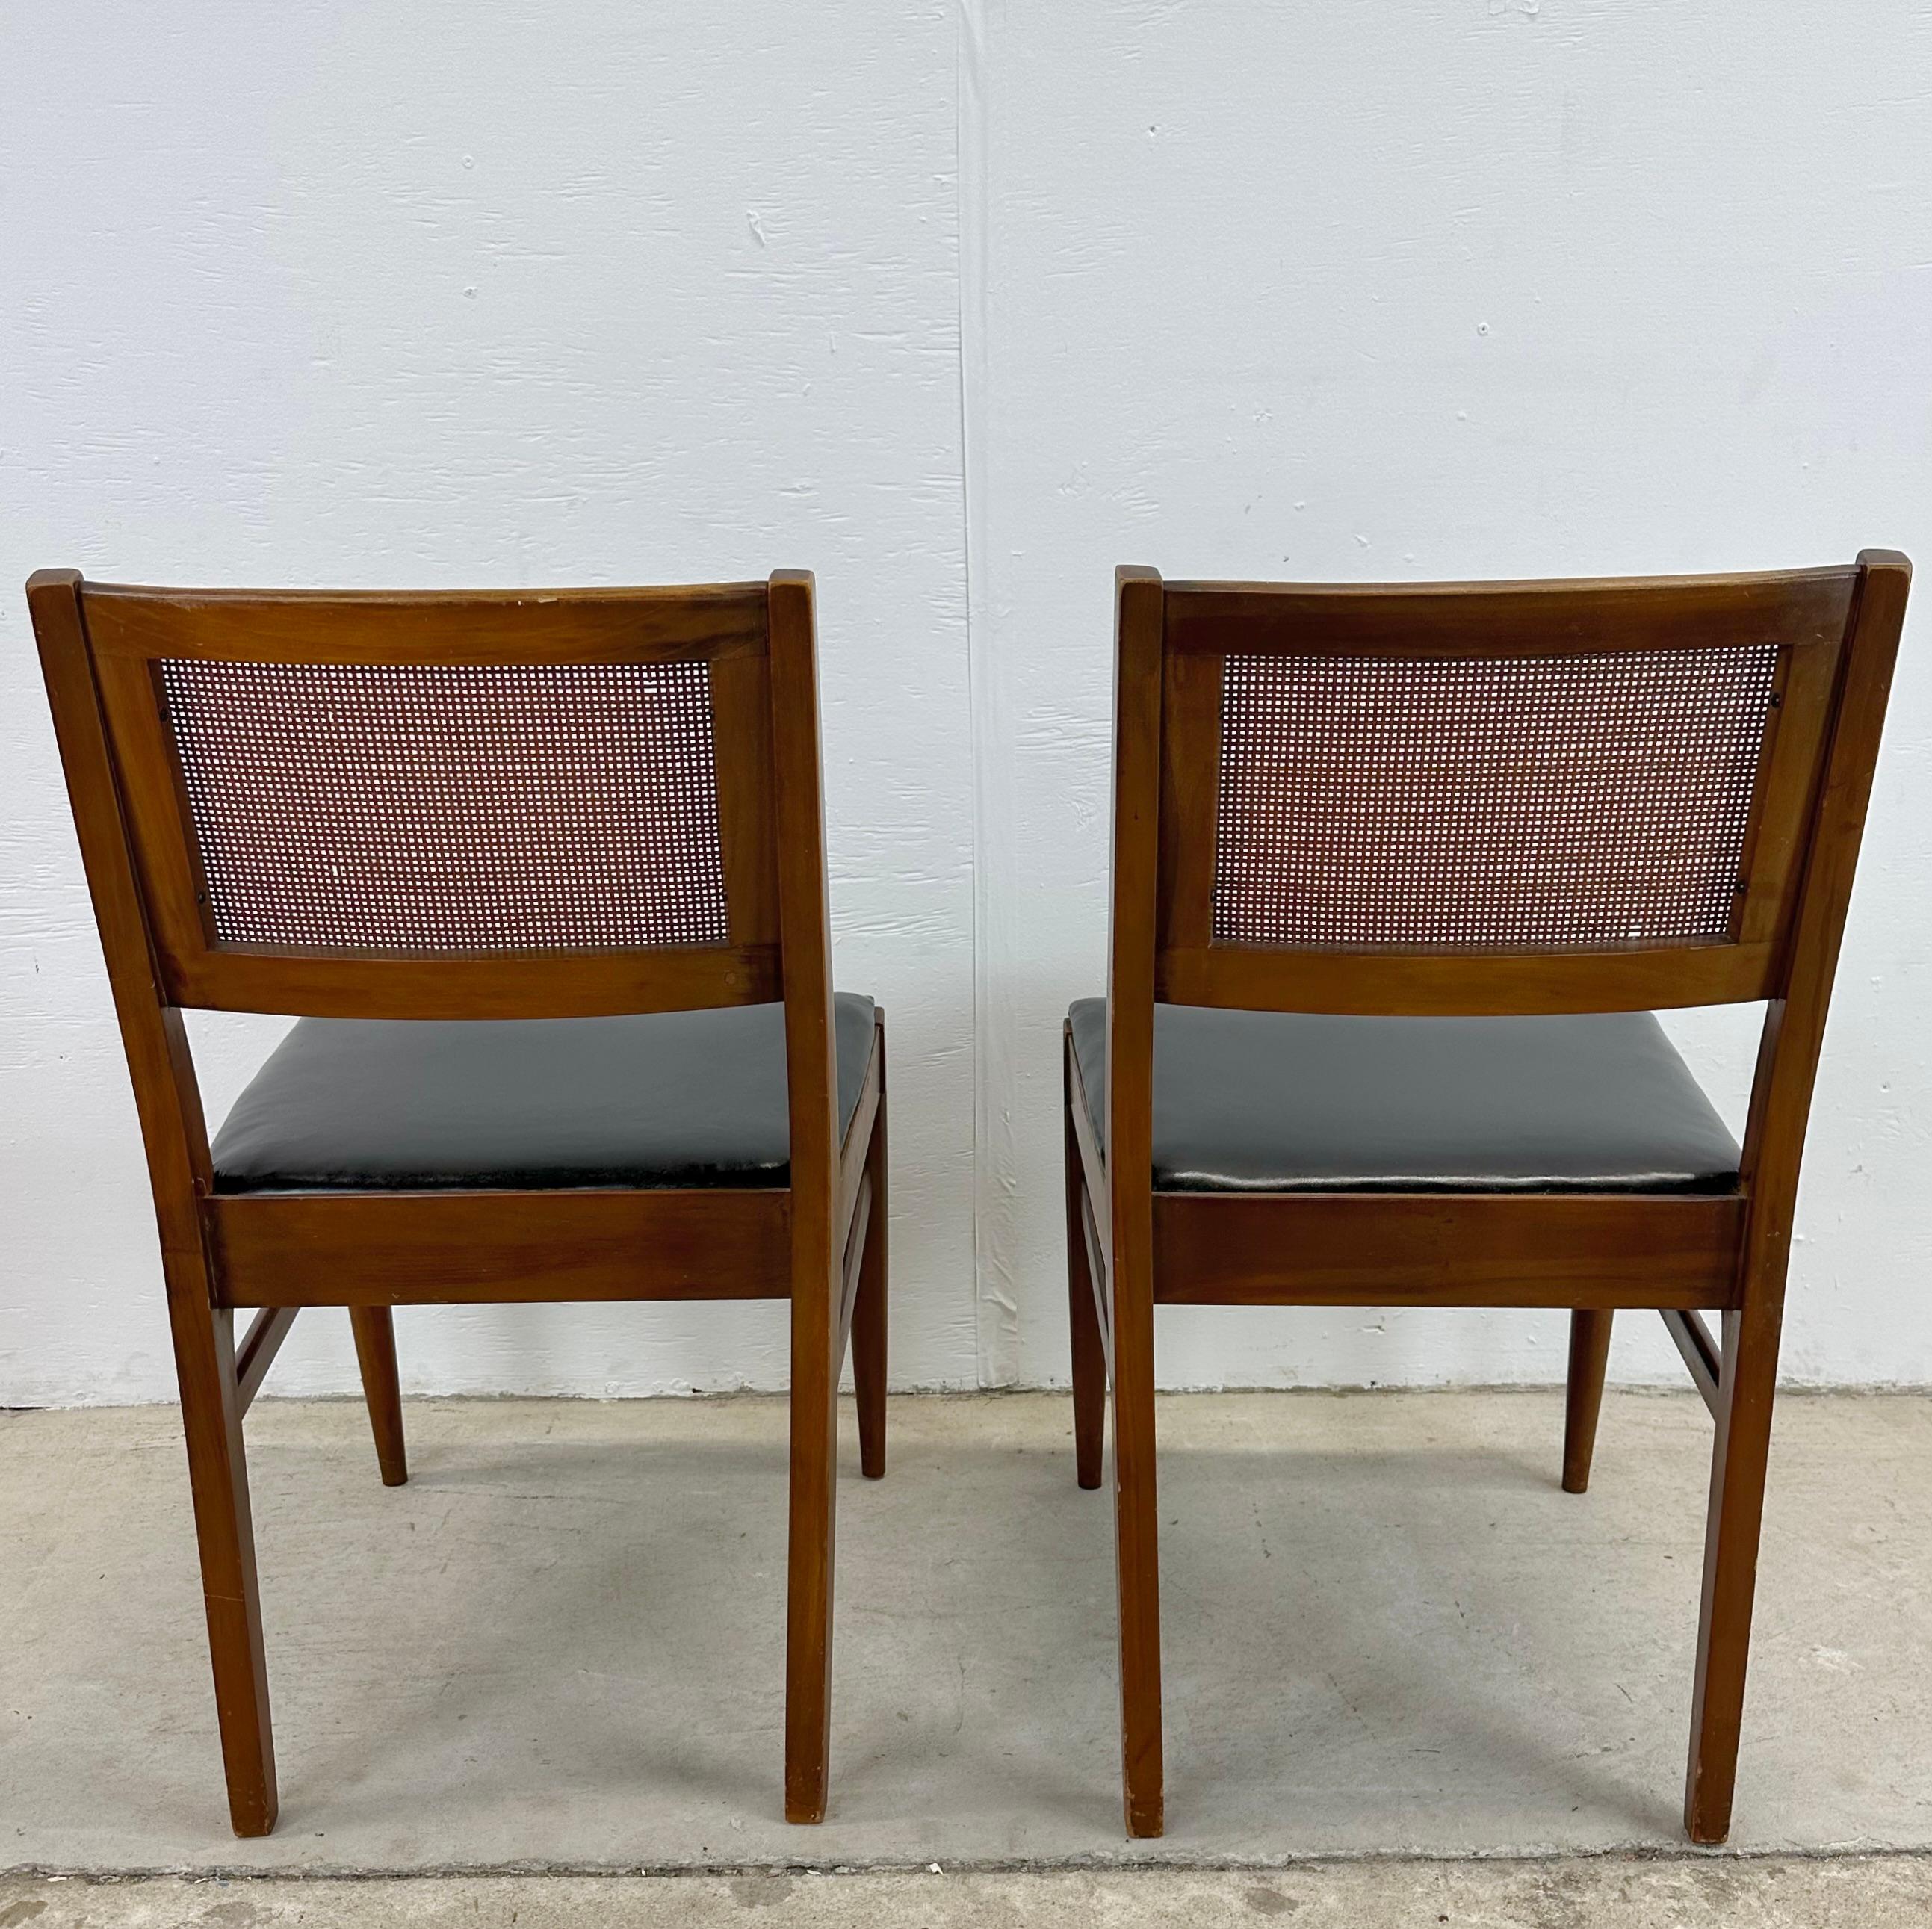 20th Century Mid-Century Dining Chairs with Cane Backs after jens risom